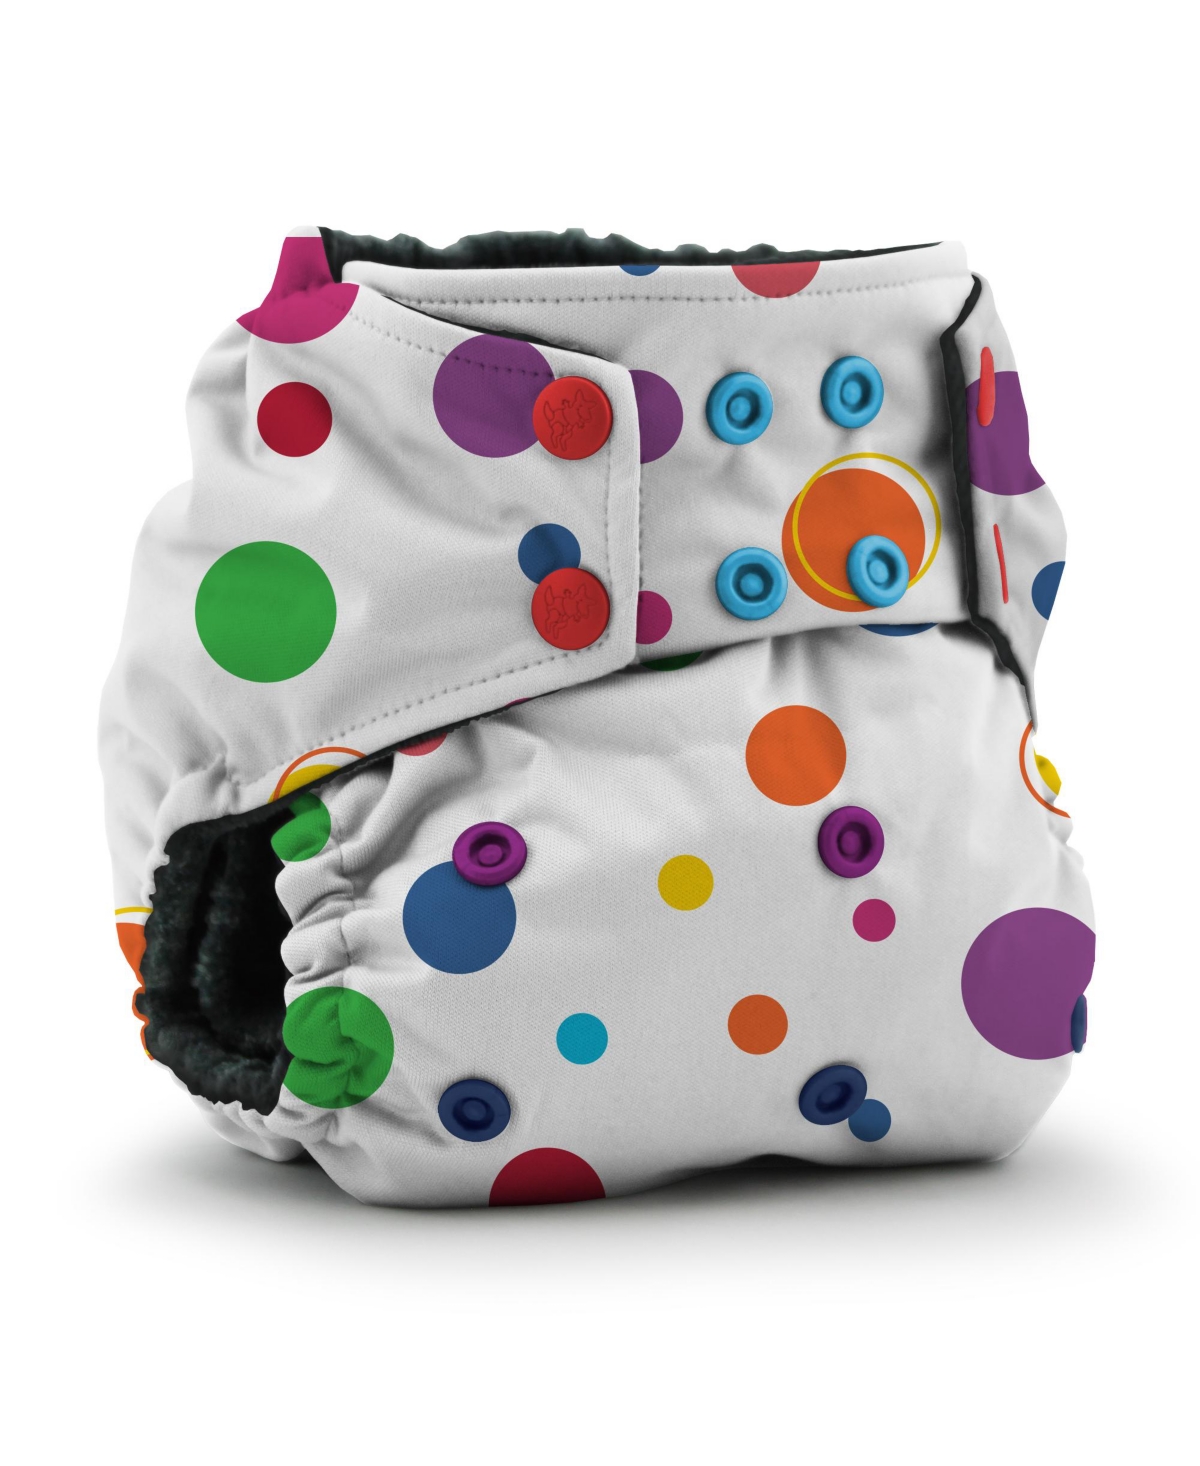 Kanga Care Rumparooz Obv (organic Rayon From Bamboo Velour) One Size Pocket Cloth Diaper In Brightly